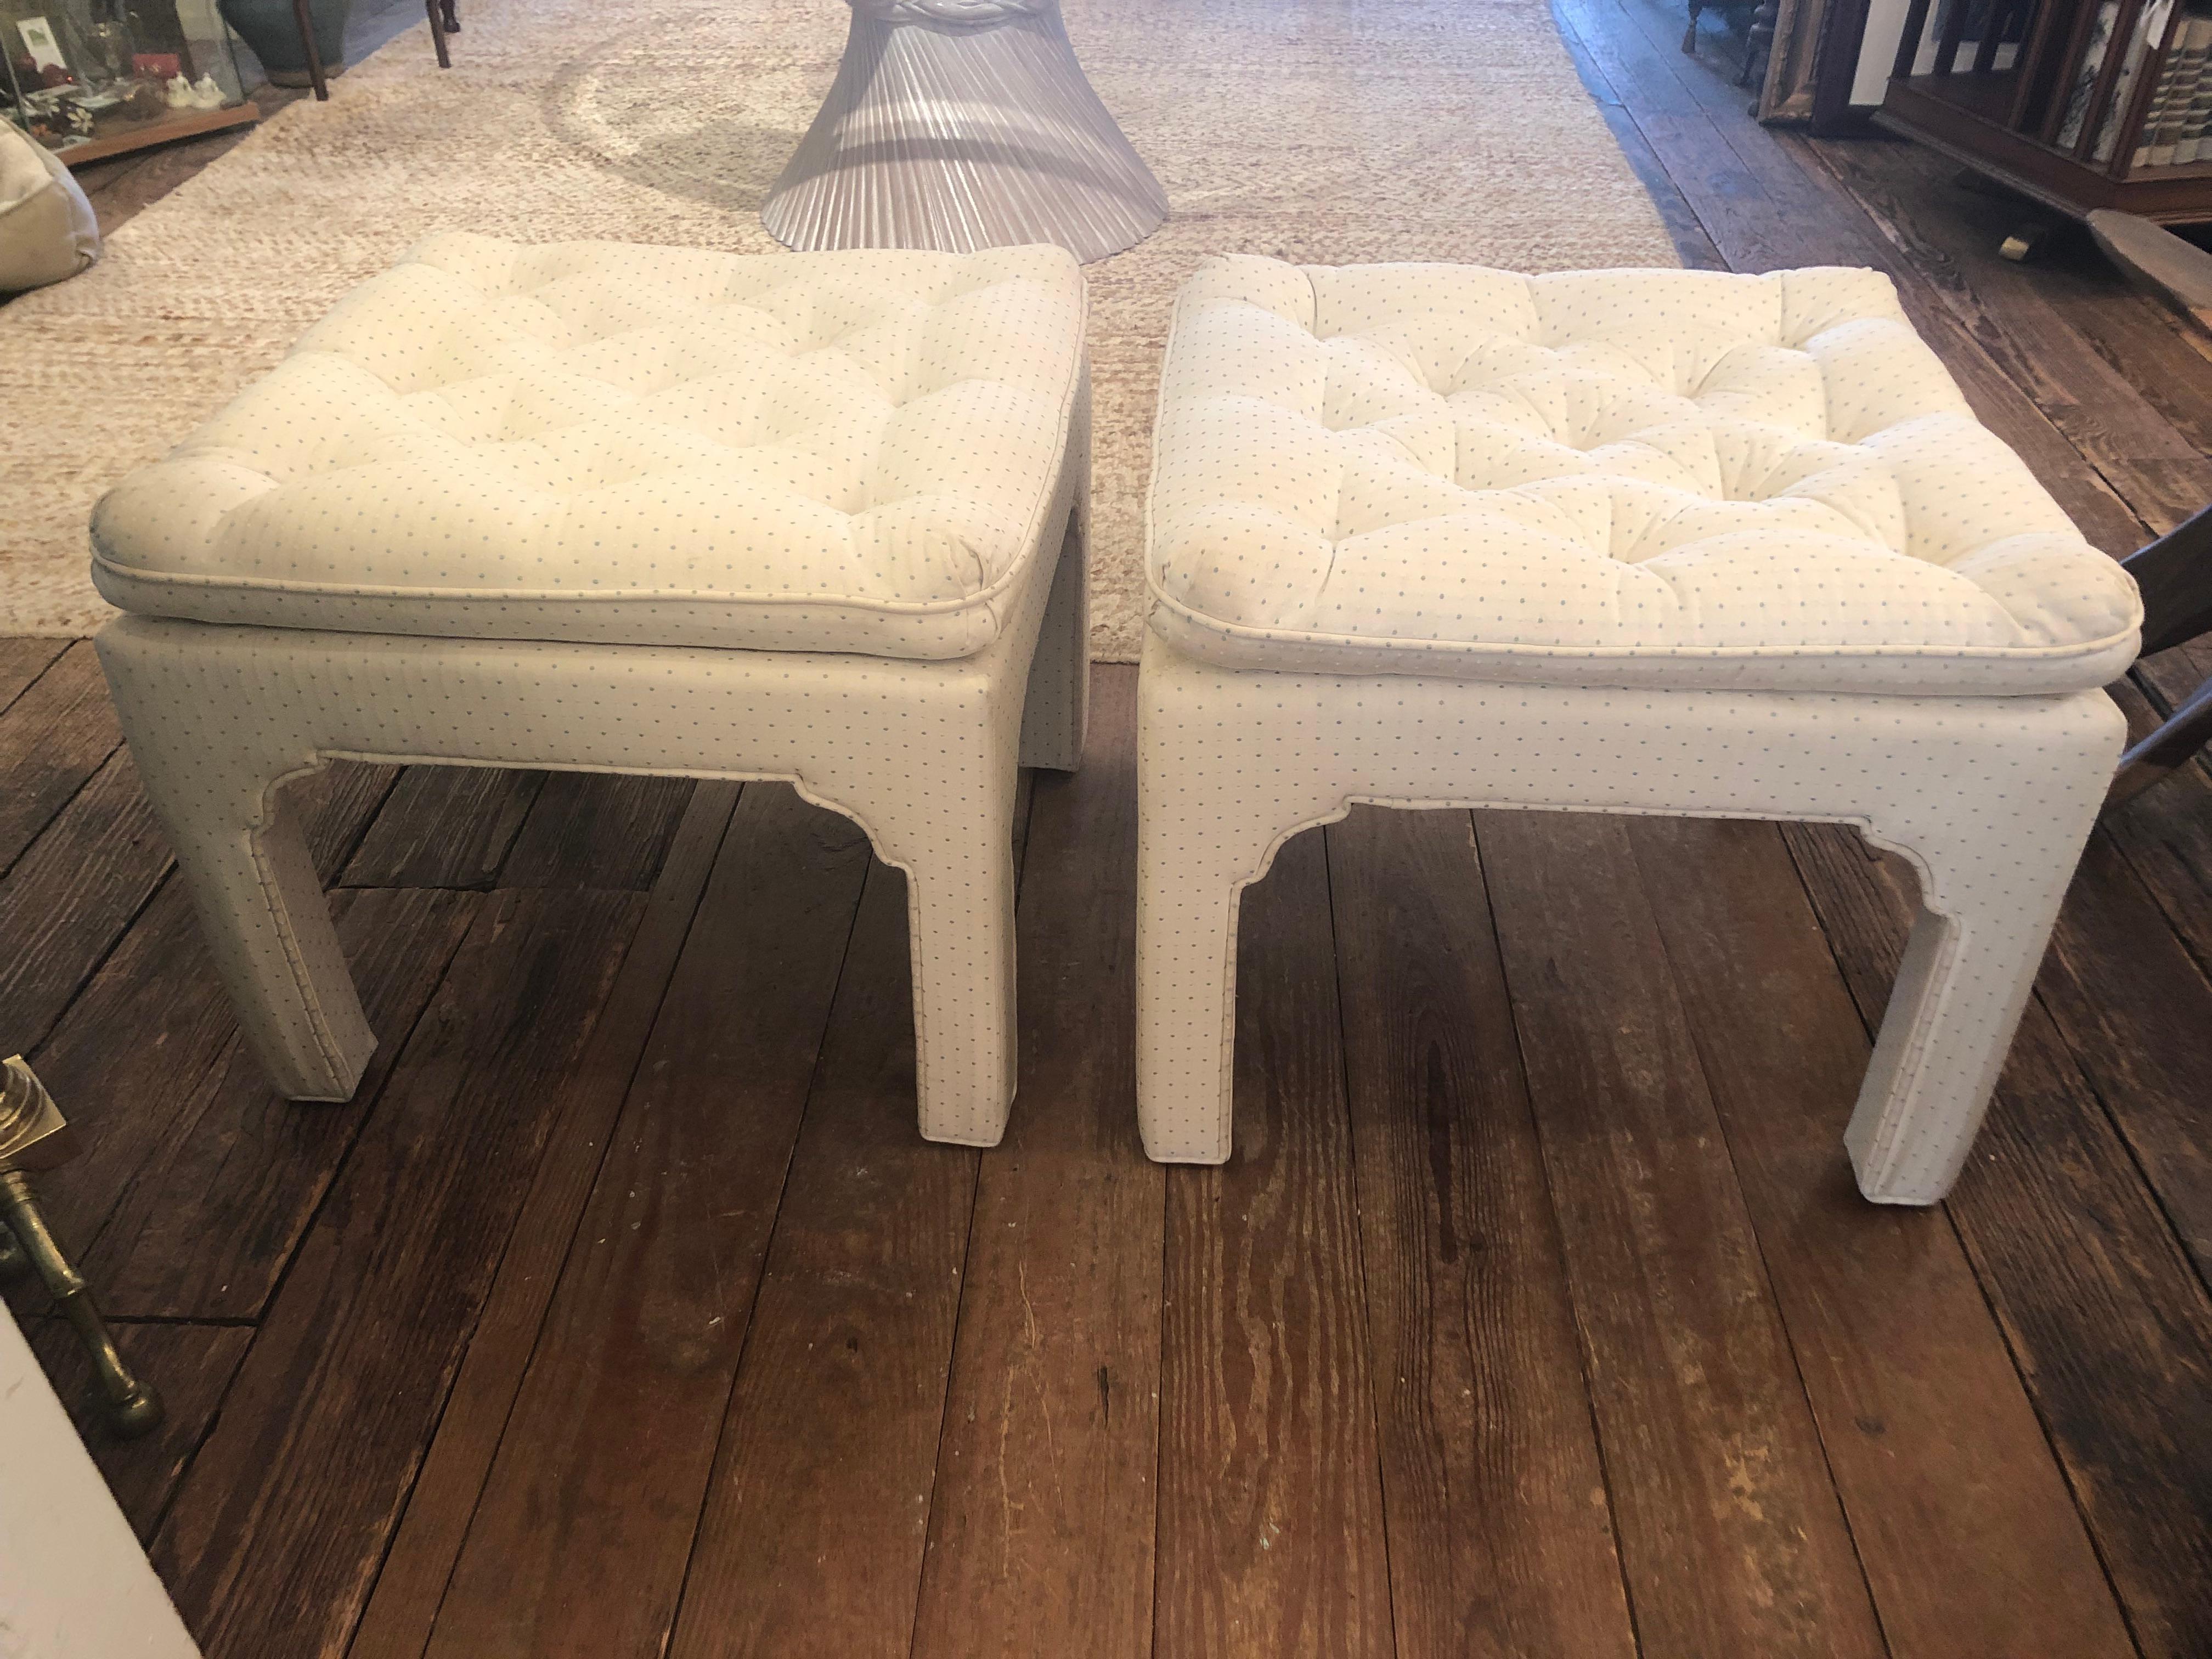 Classic Billy Baldwin style upholstered ottomans having tufted pillow tops and Chinese form legs. Fabric is a neutral off white with dots. 
Recommend professional cleaning.